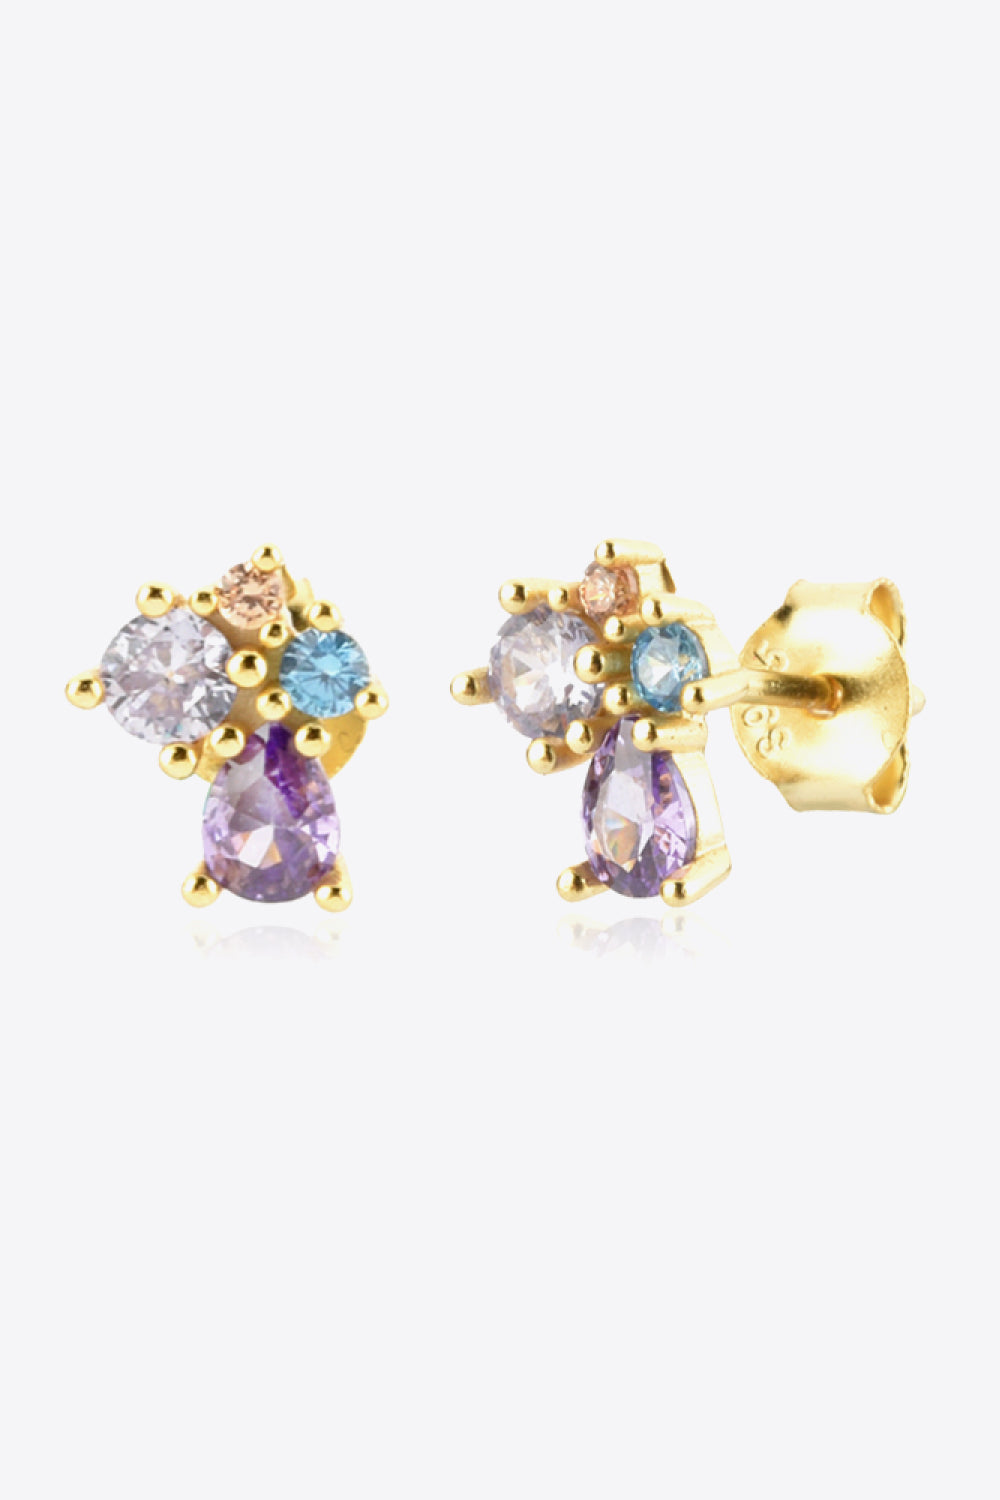 PURPLE ONE SIZE Multicolored Zircon 925 Sterling Silver Gold Plated Stud Earrings - 2 colors - earrings at TFC&H Co.